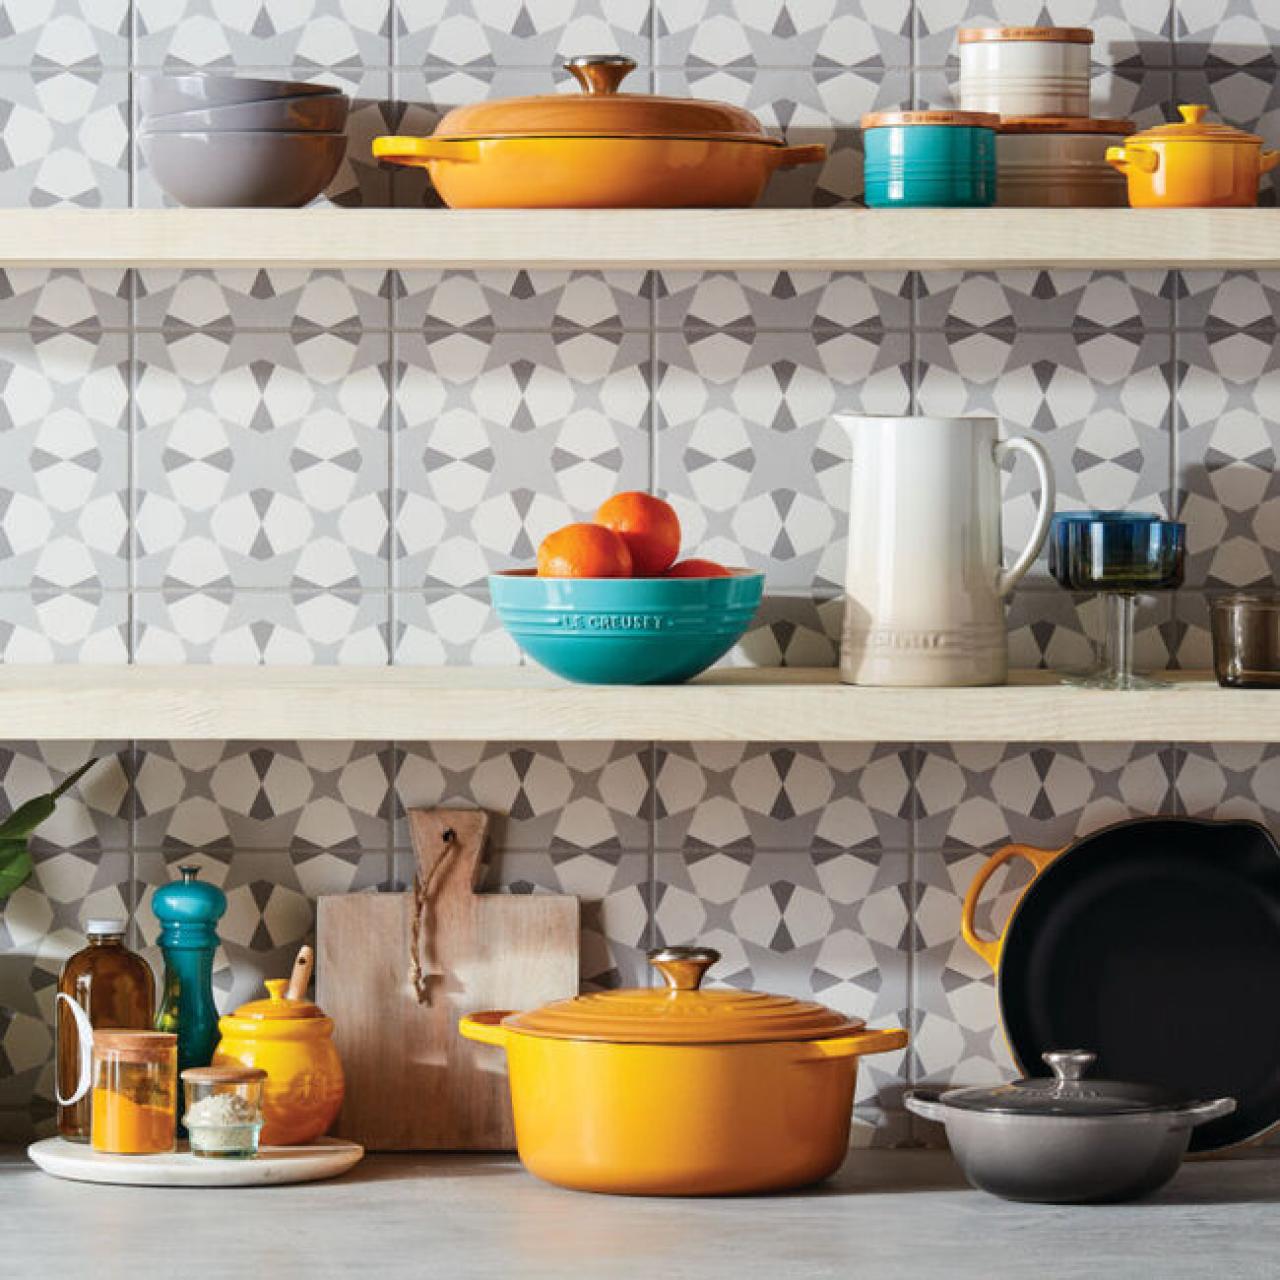 Le Creuset Sale Is Both Online and In-Store | FN Dish - Behind-the-Scenes, Food Trends, and Best Recipes : Food Network | Network